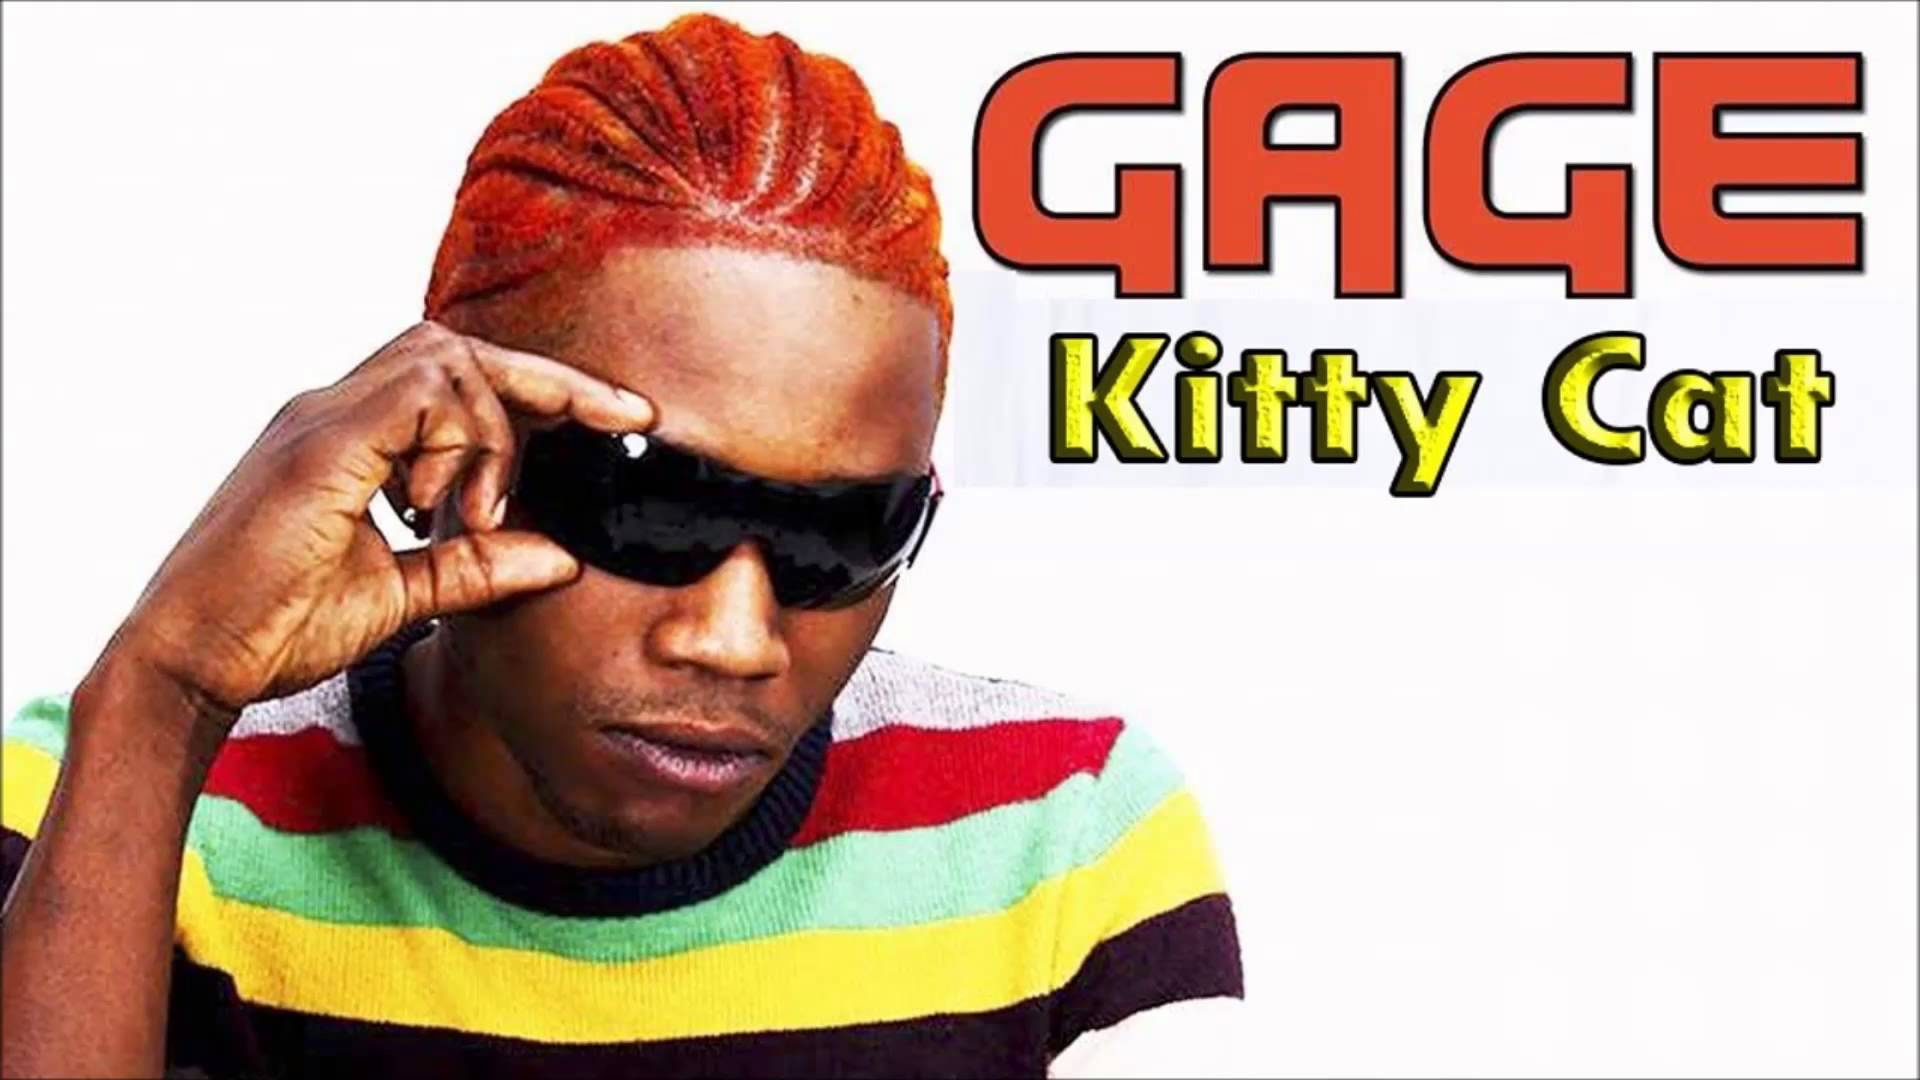 Gage - Kitty Cat (Clean) - YouTube